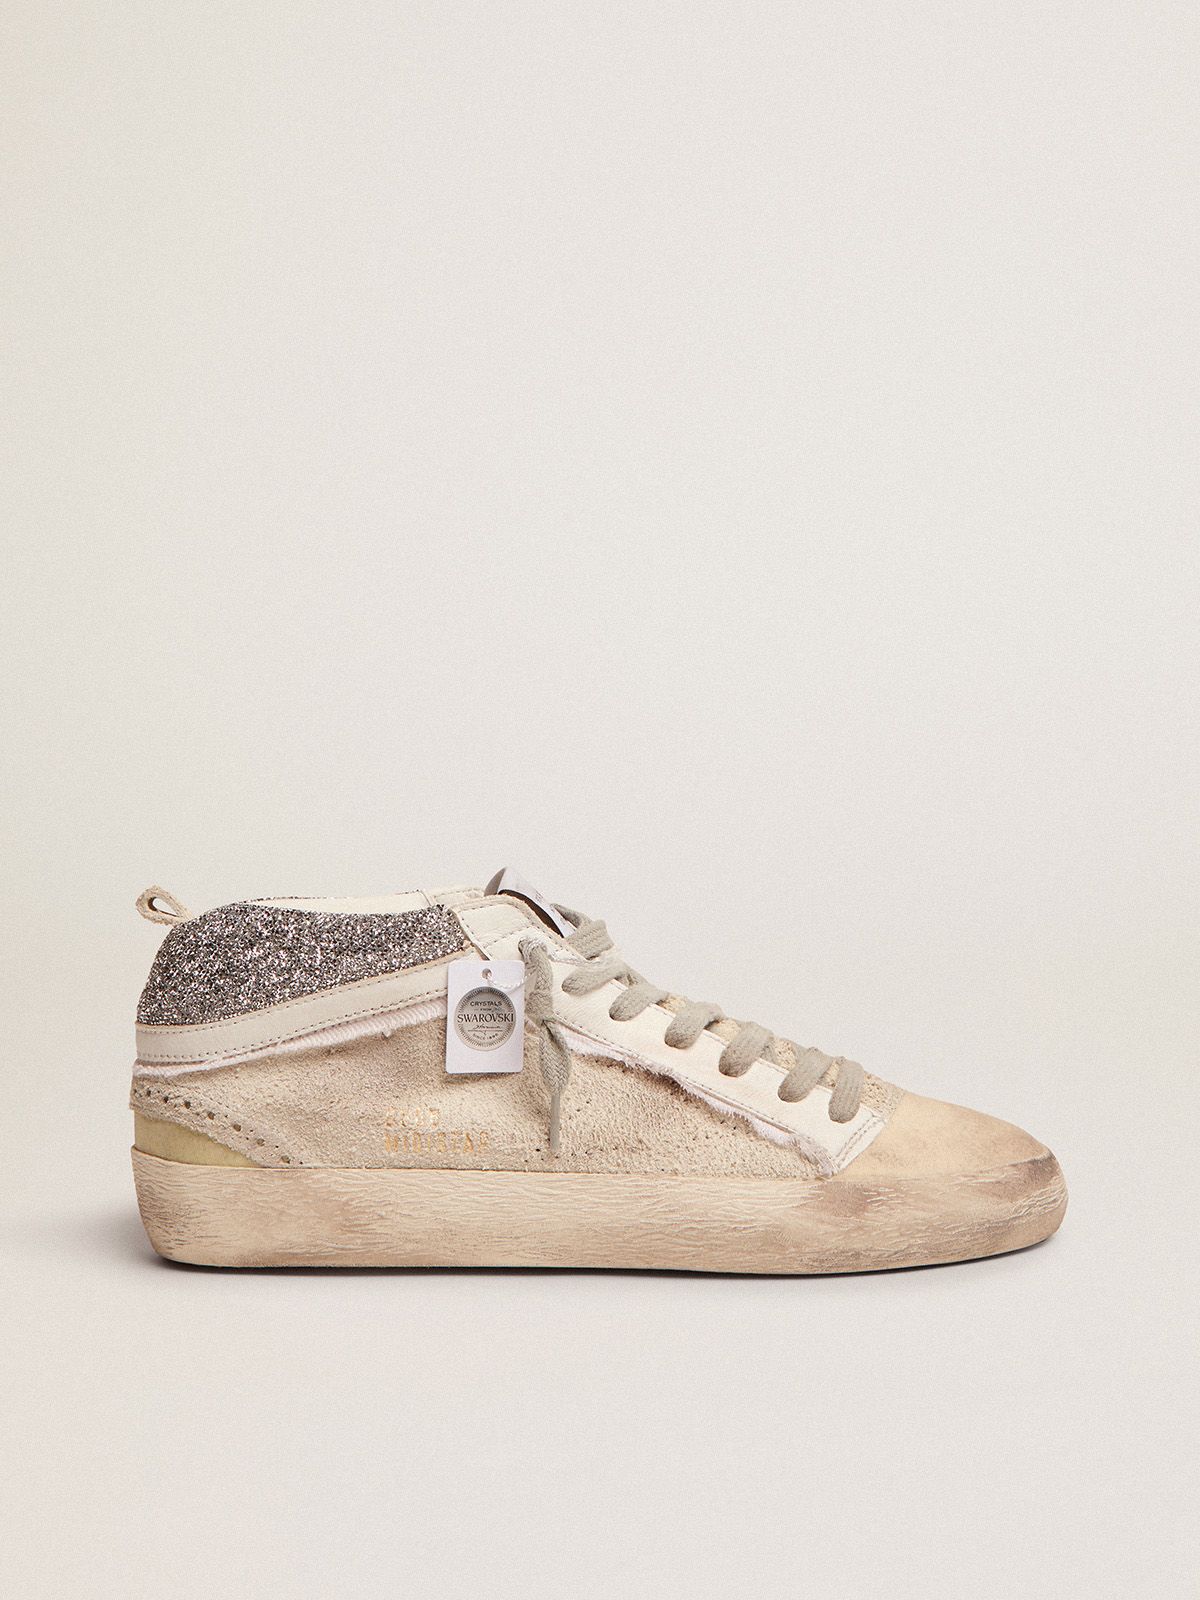 Mid Star sneakers with off-white reverse leather upper and Swarovski crystal heel tab | 